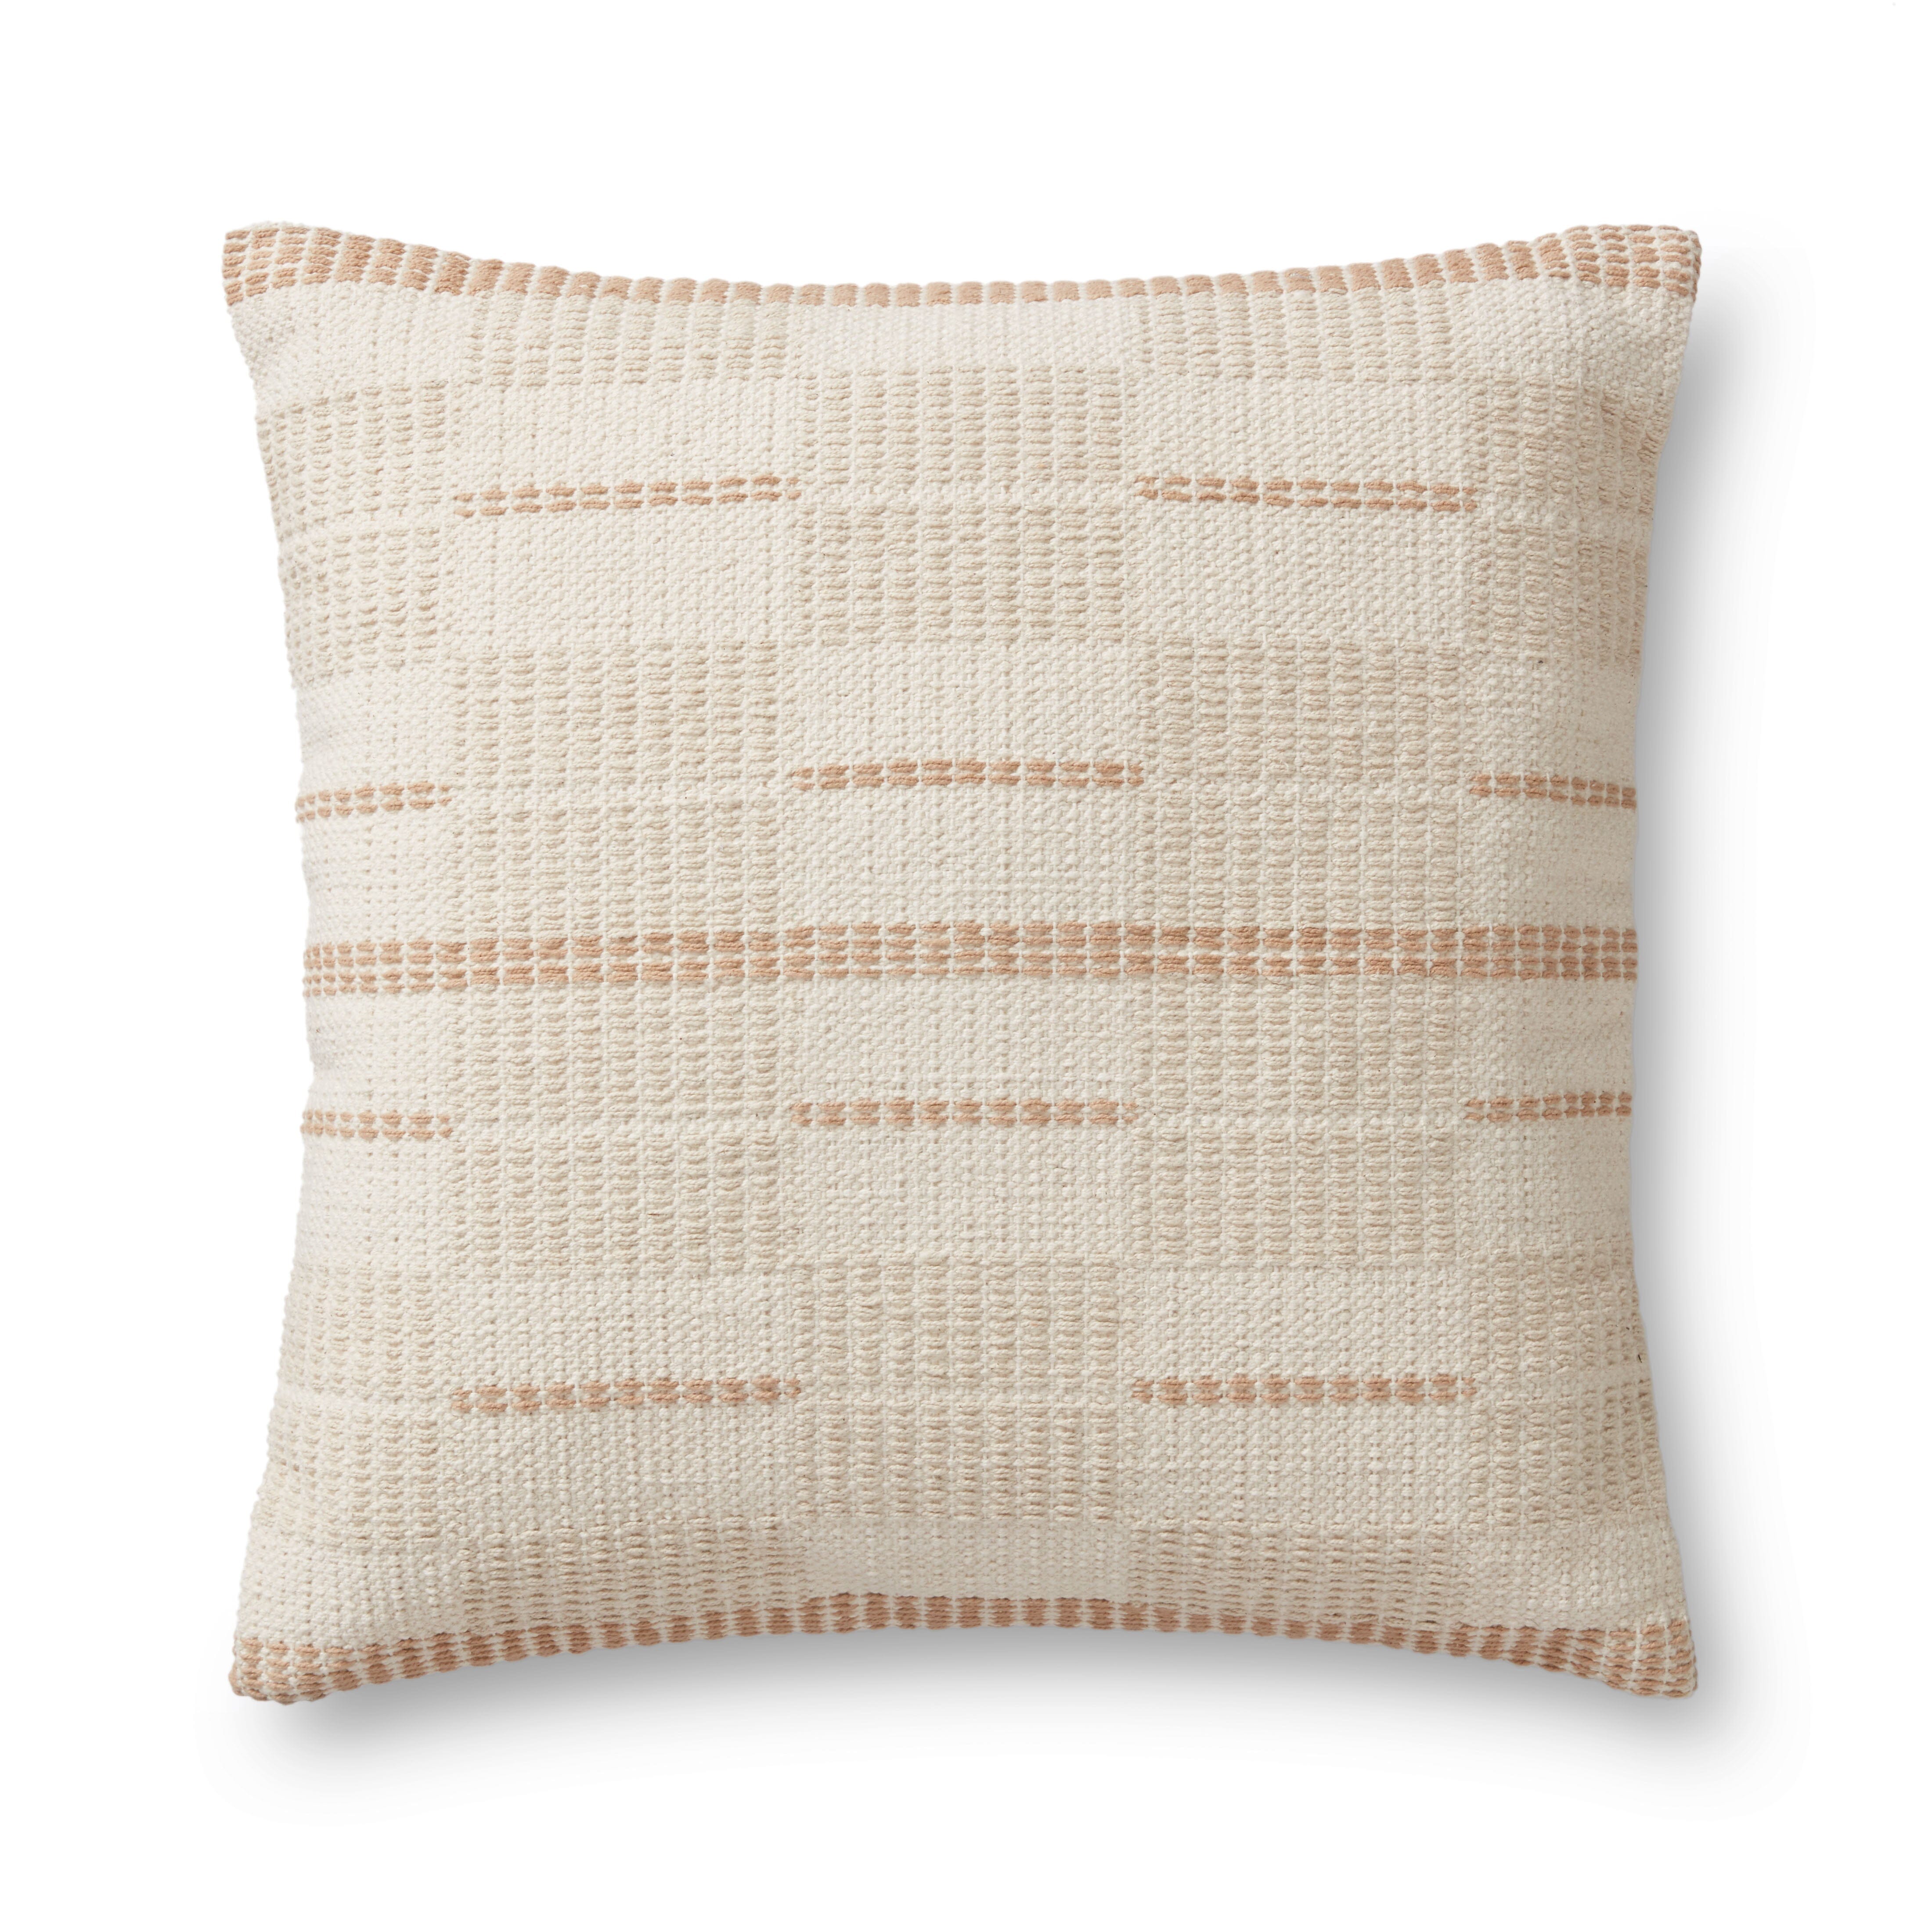 Magnolia Home by Joanna Gaines x Loloi Pillow | Multi PILLOW Magnolia Home by Joanna Gaines x Loloi